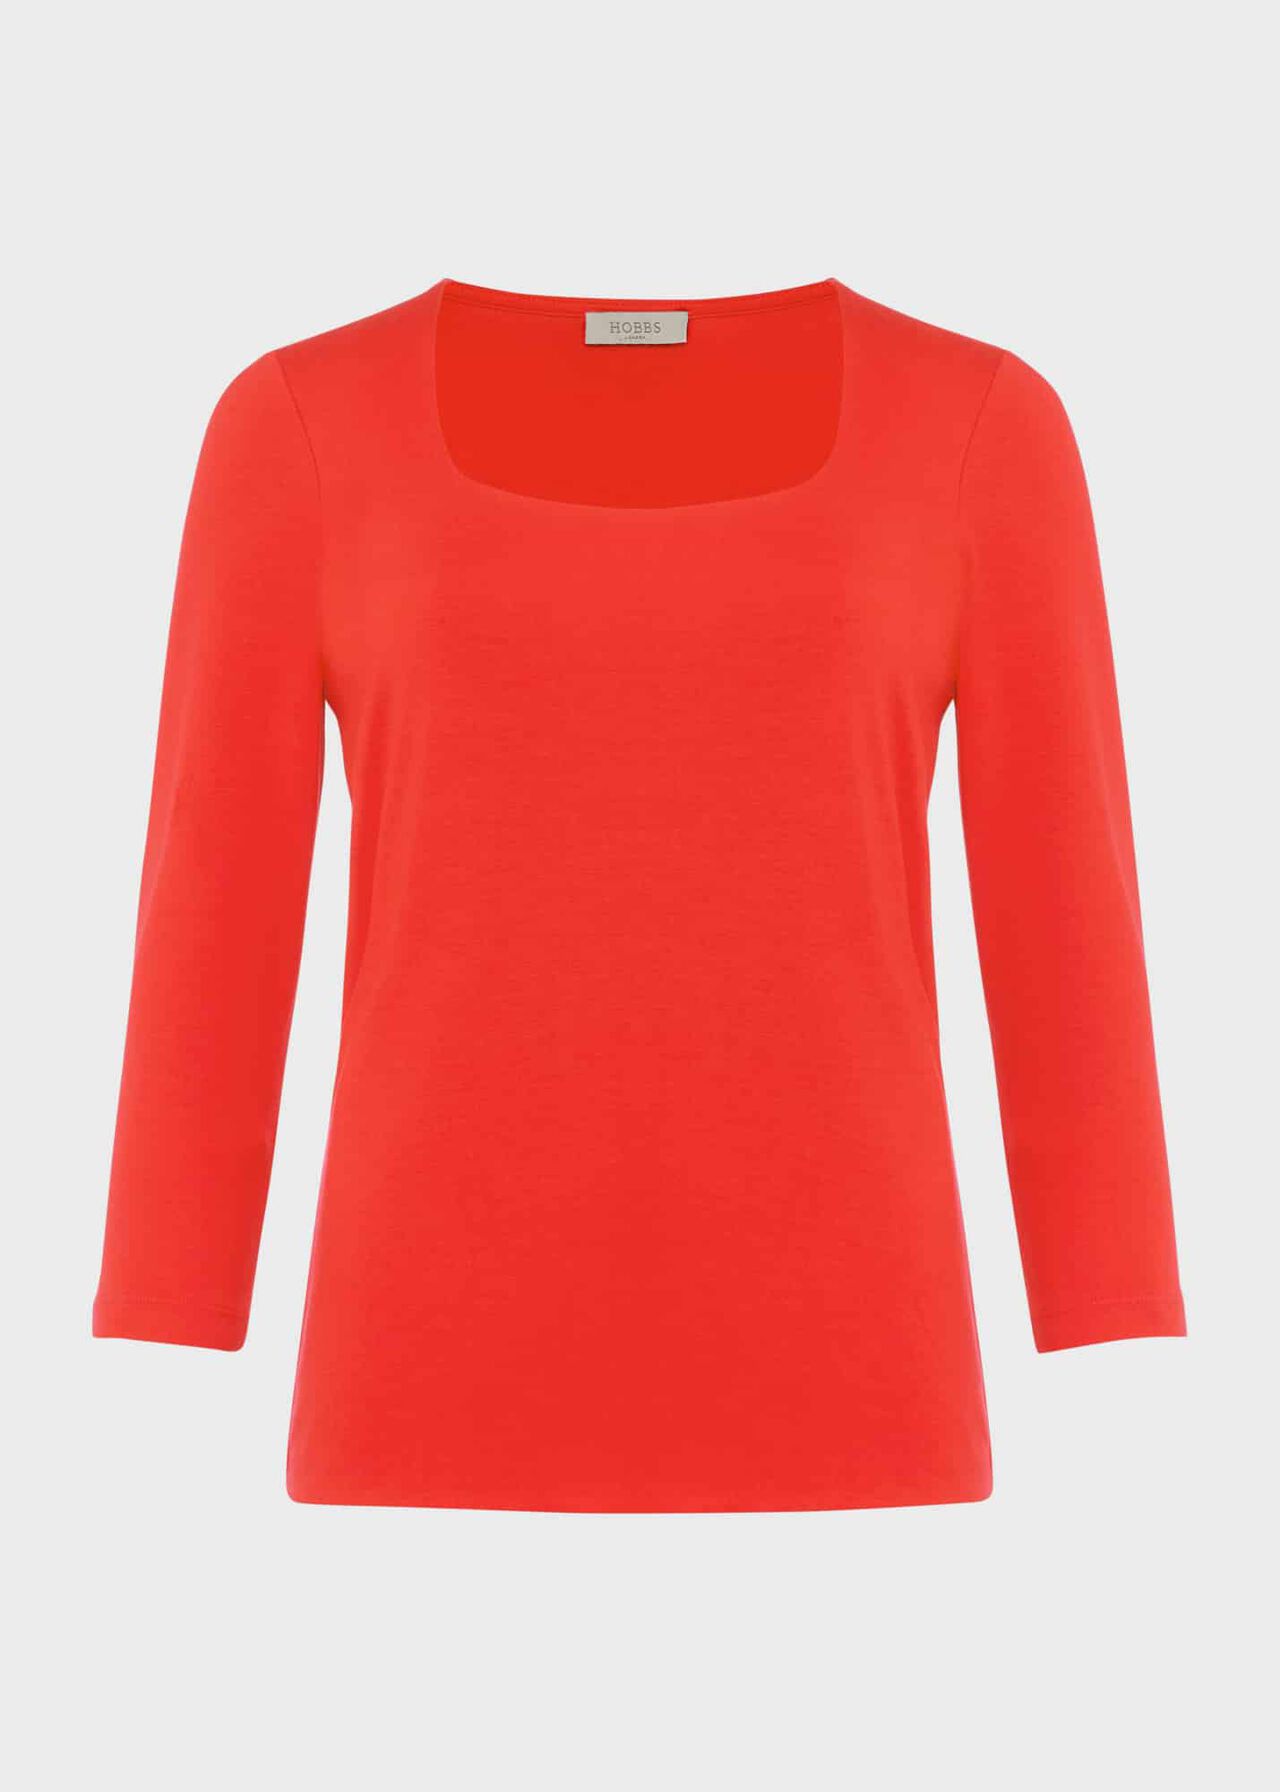 Debbie Double Fronted Top, Coral Red, hi-res